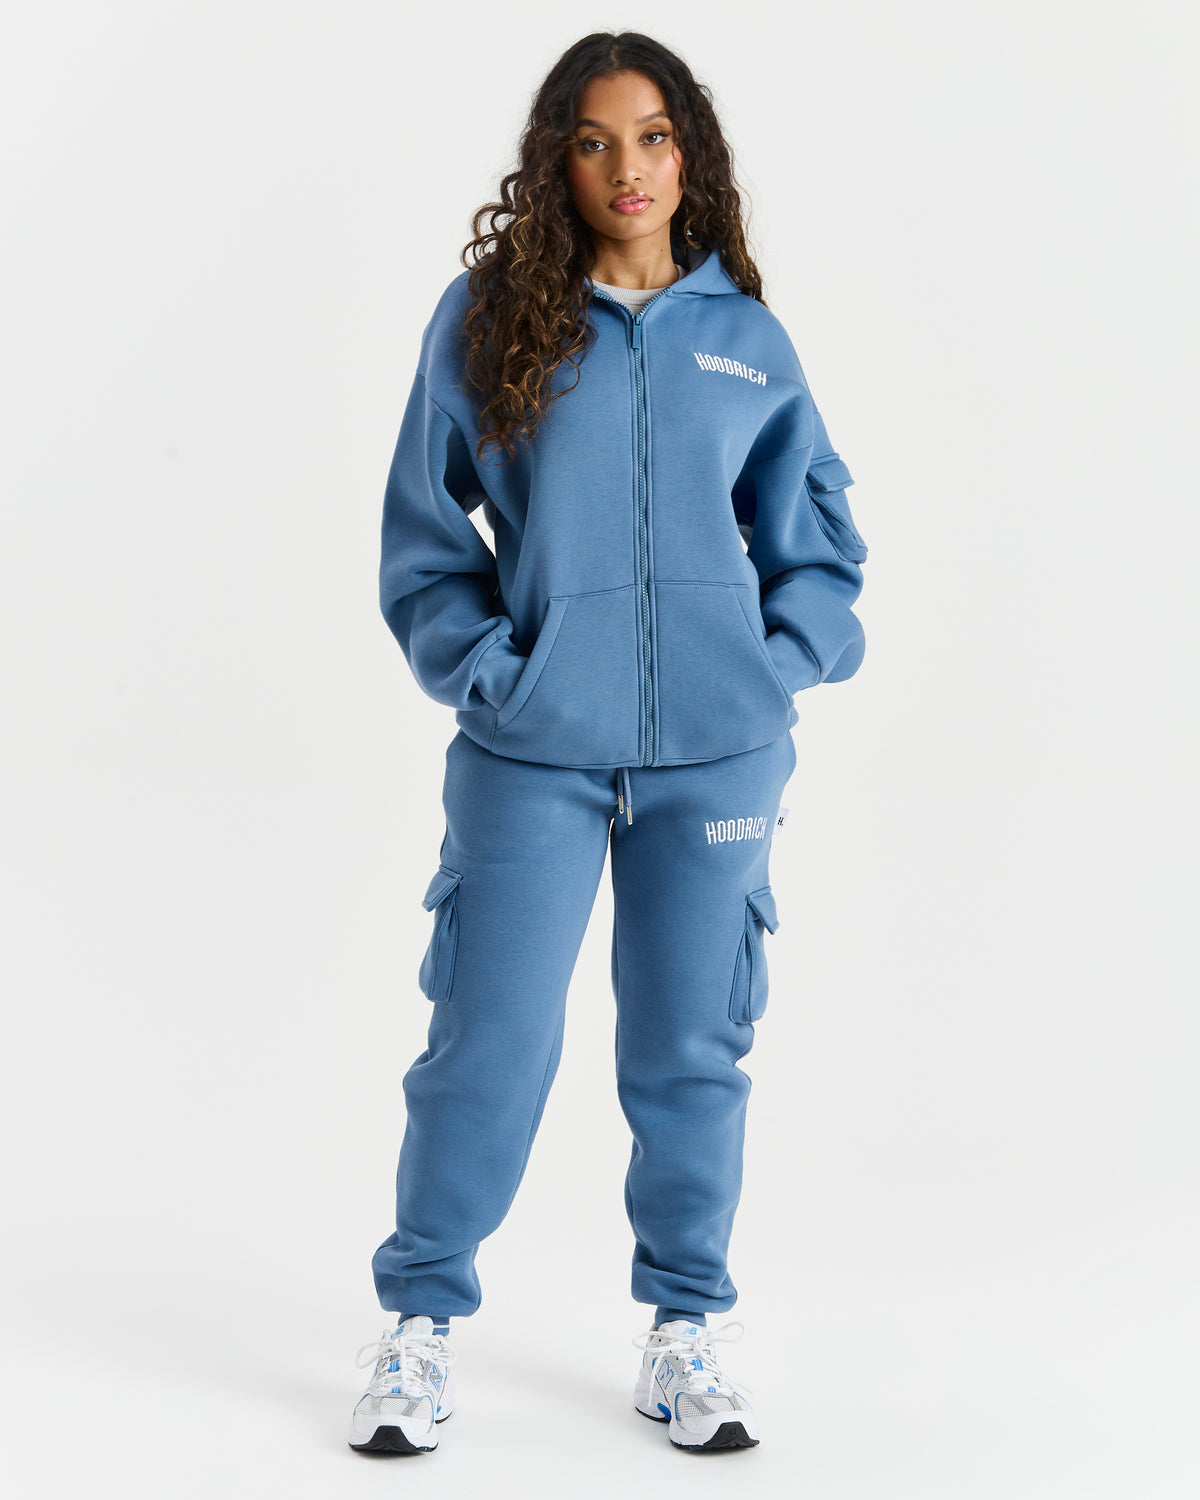 Women's Tracksuit with Hood Navy Blue Bolf 0002